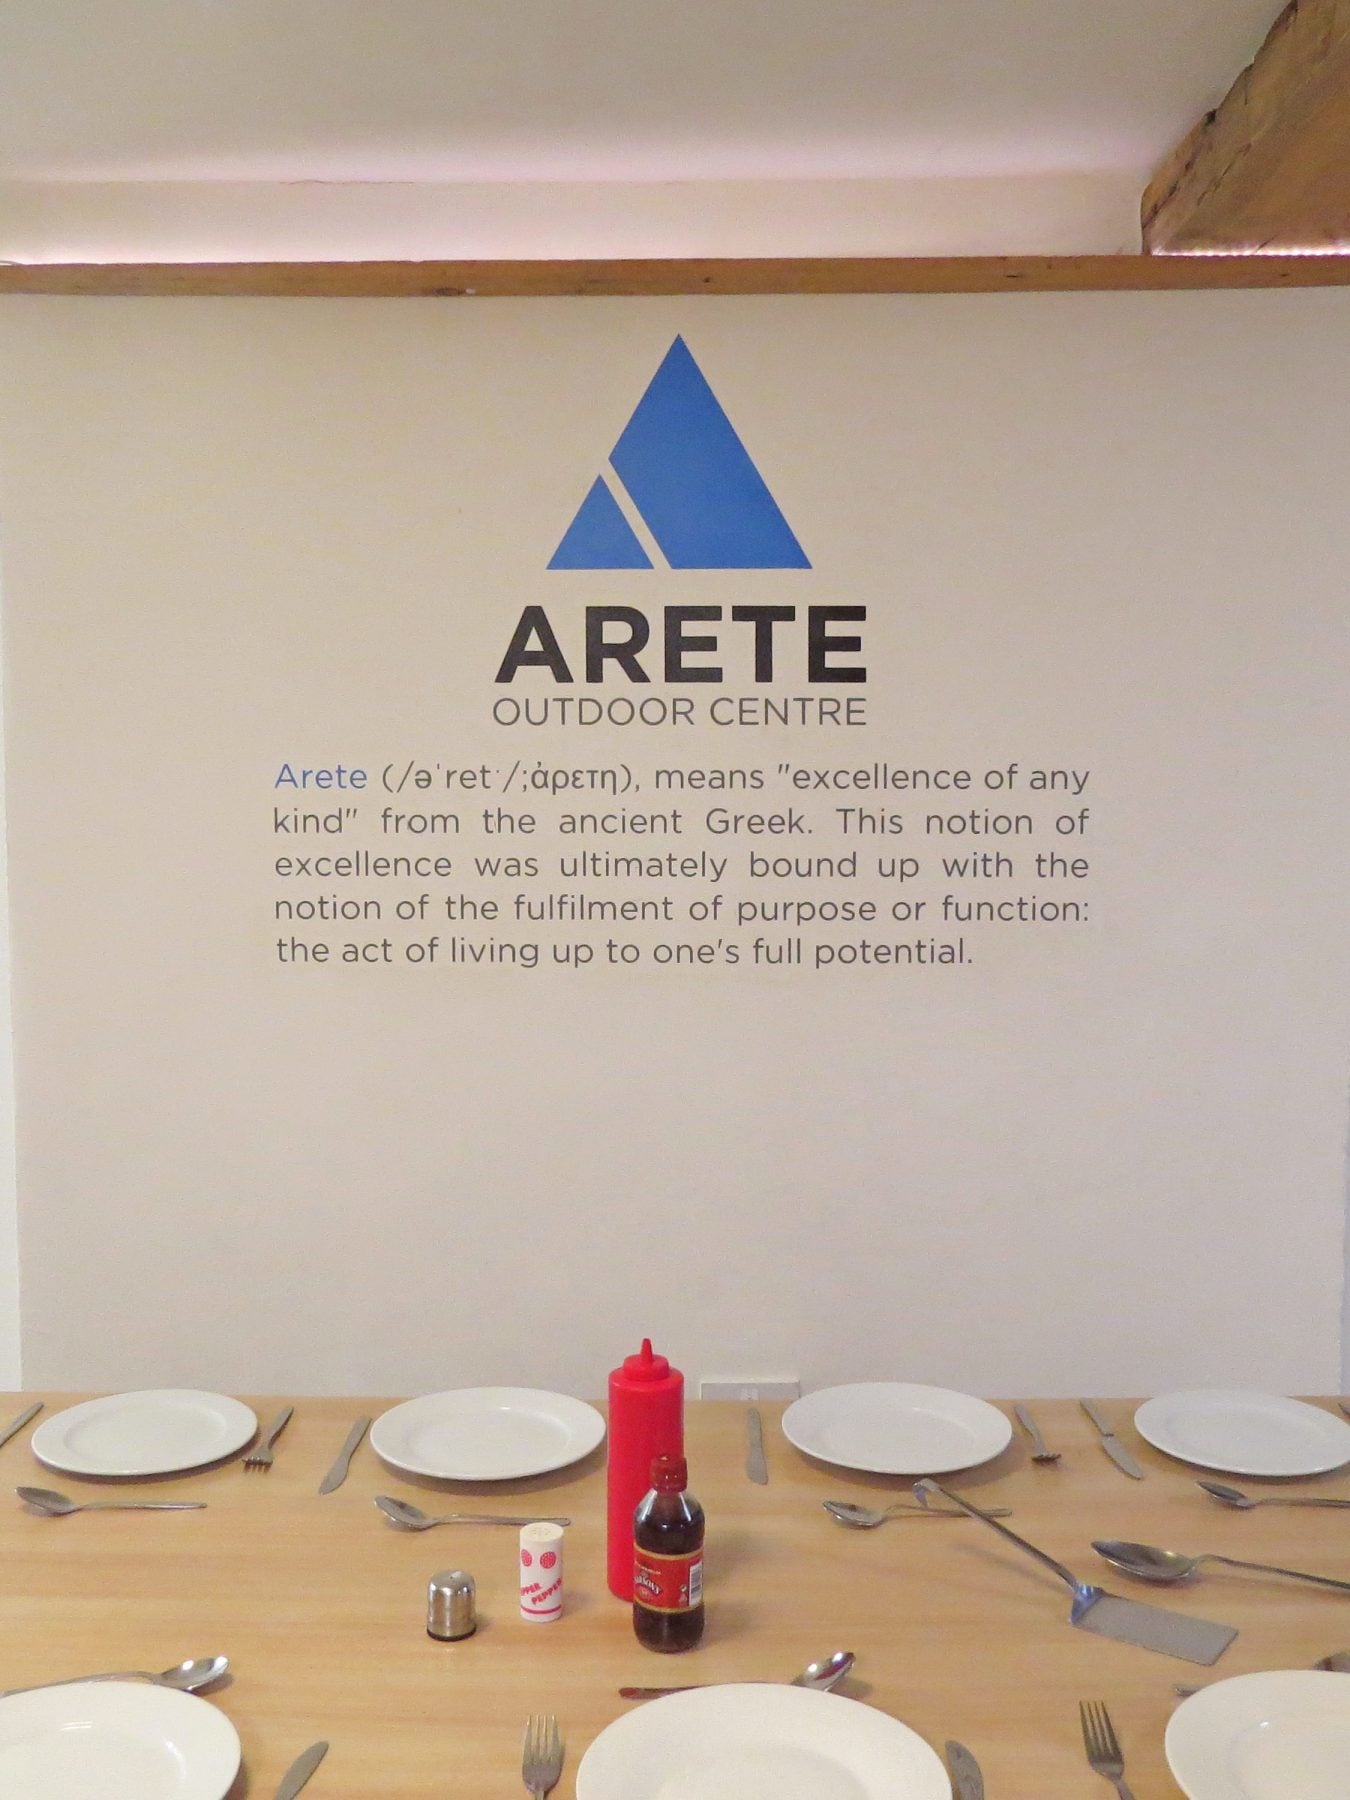 Table layed up for dinner underneath the Arete Outdoor Centre logo